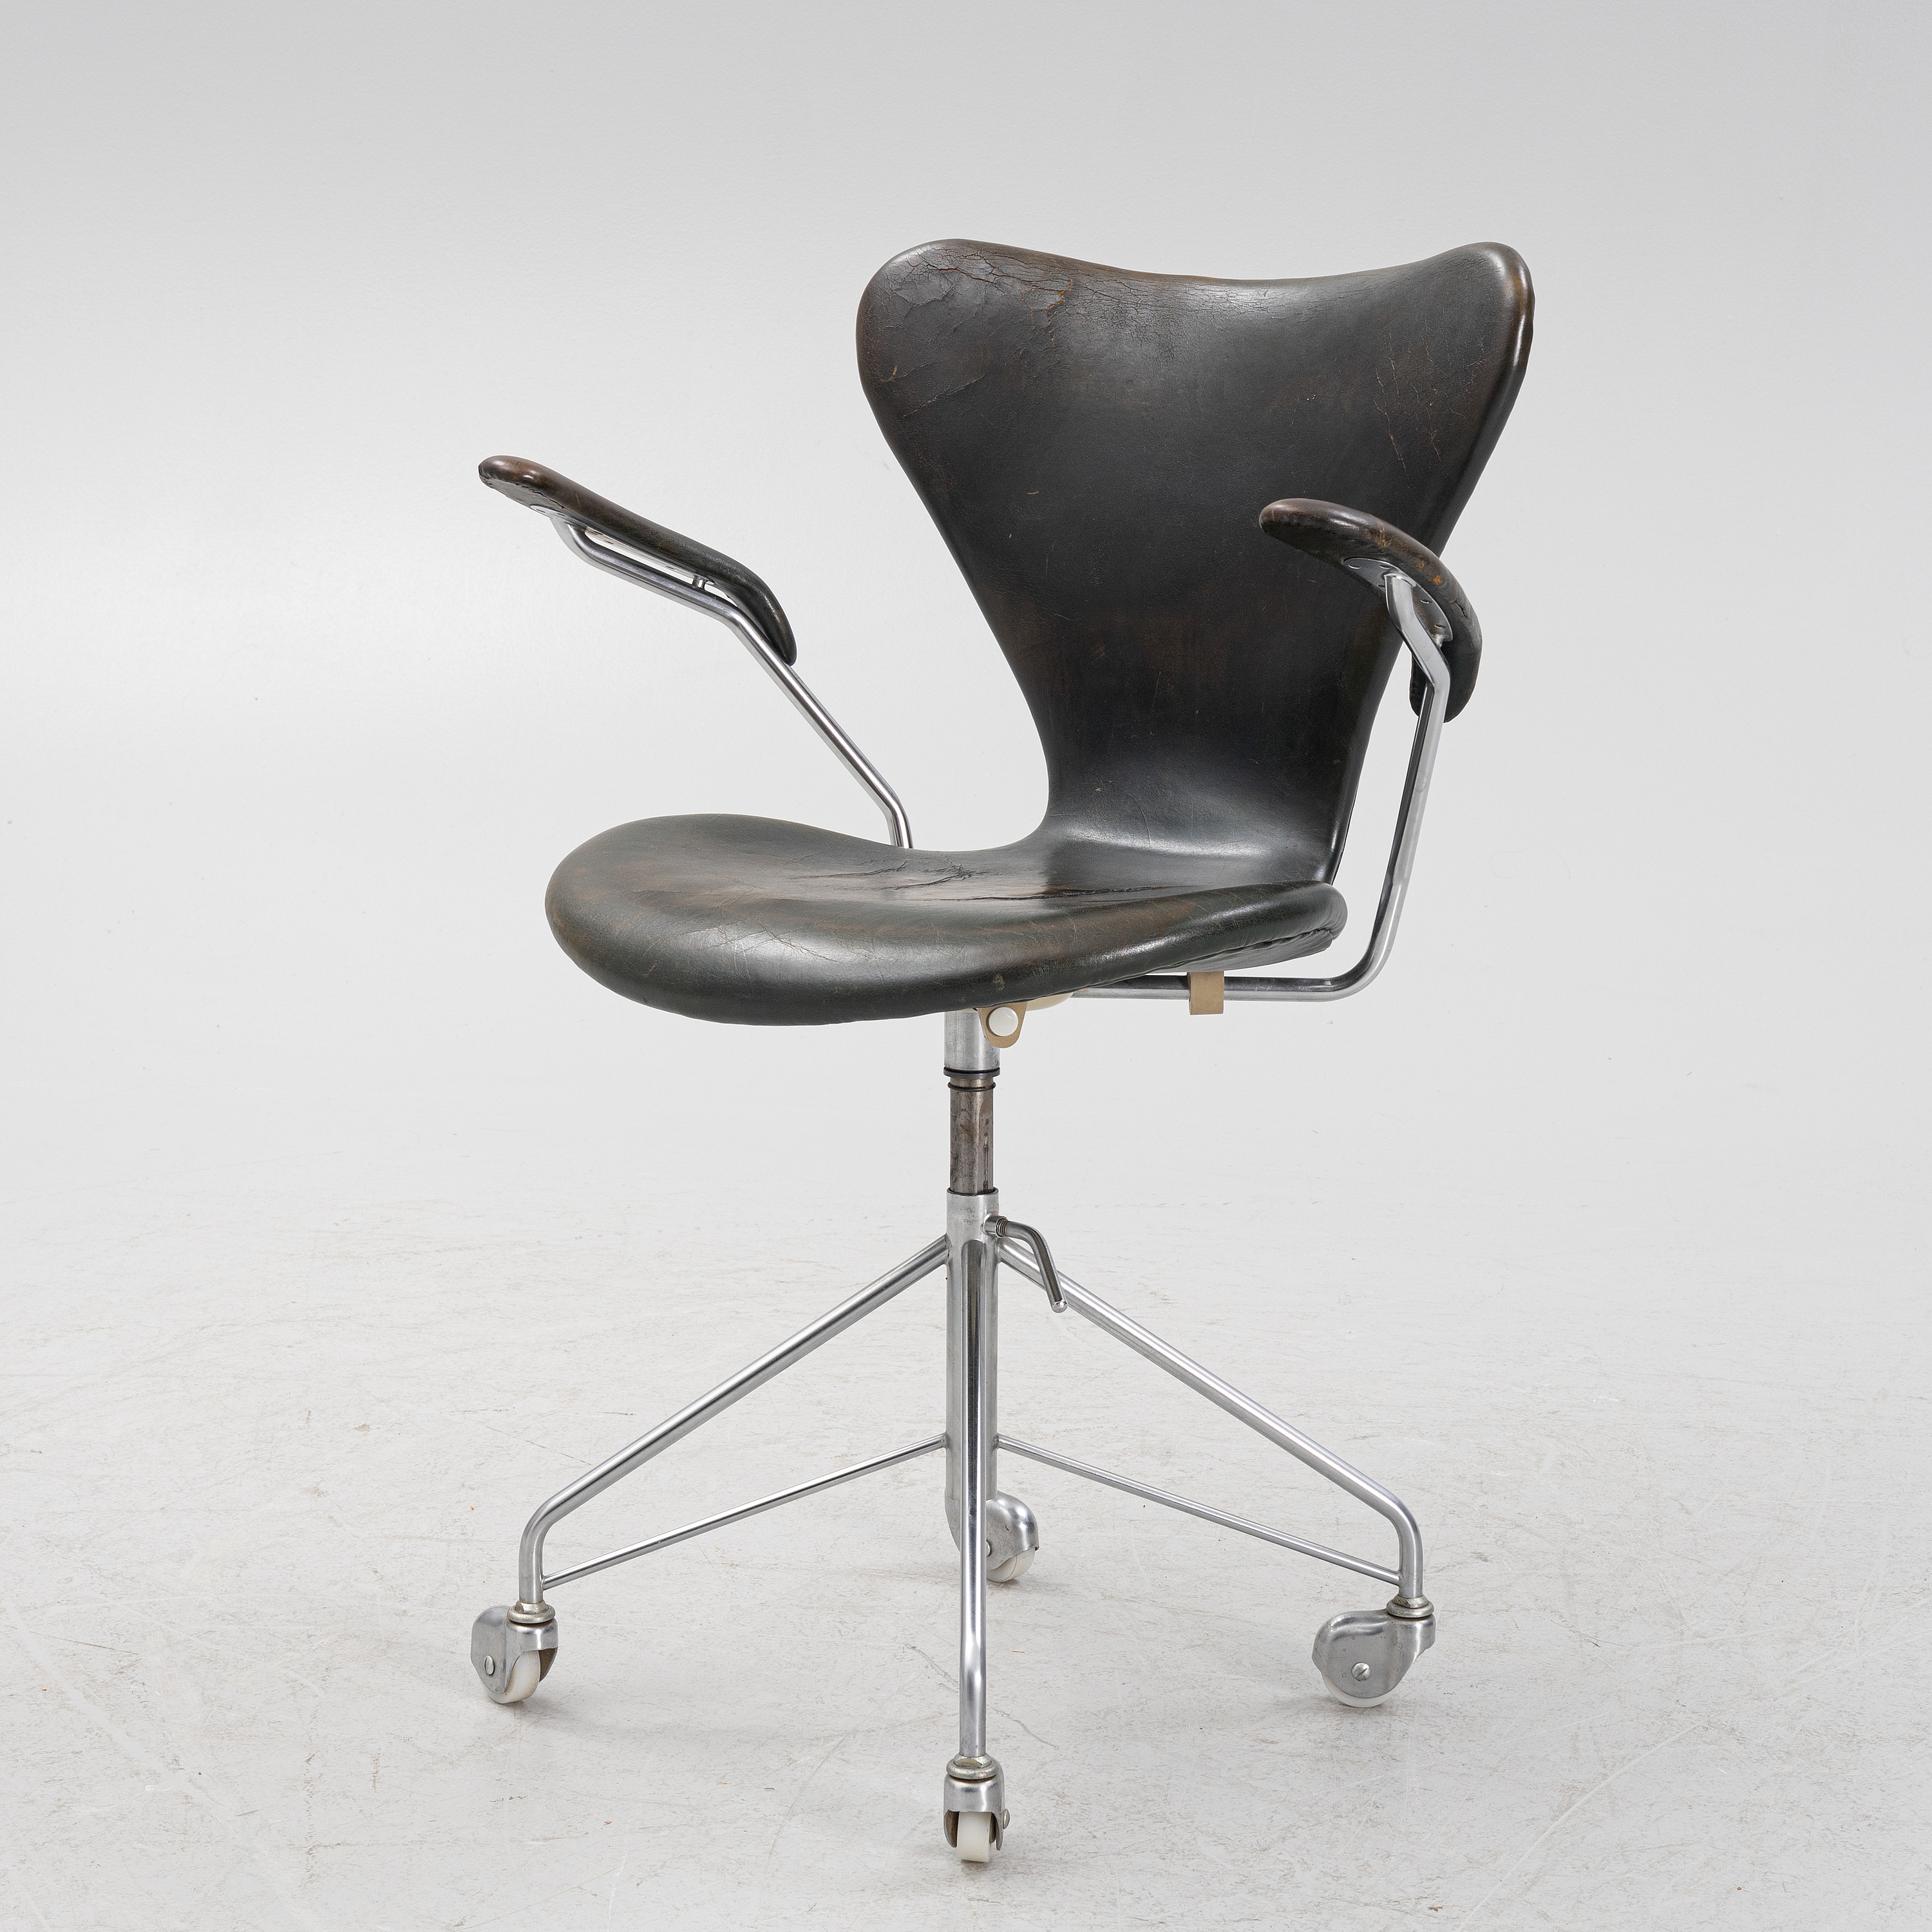 Artwork by Arne Jacobsen, a 'Sjuan' swivel chair, Fritz Hansen, Denmark 1970, Made of Chrome plated metal base on four wheels, upholstered seat and back with dark green/black leather